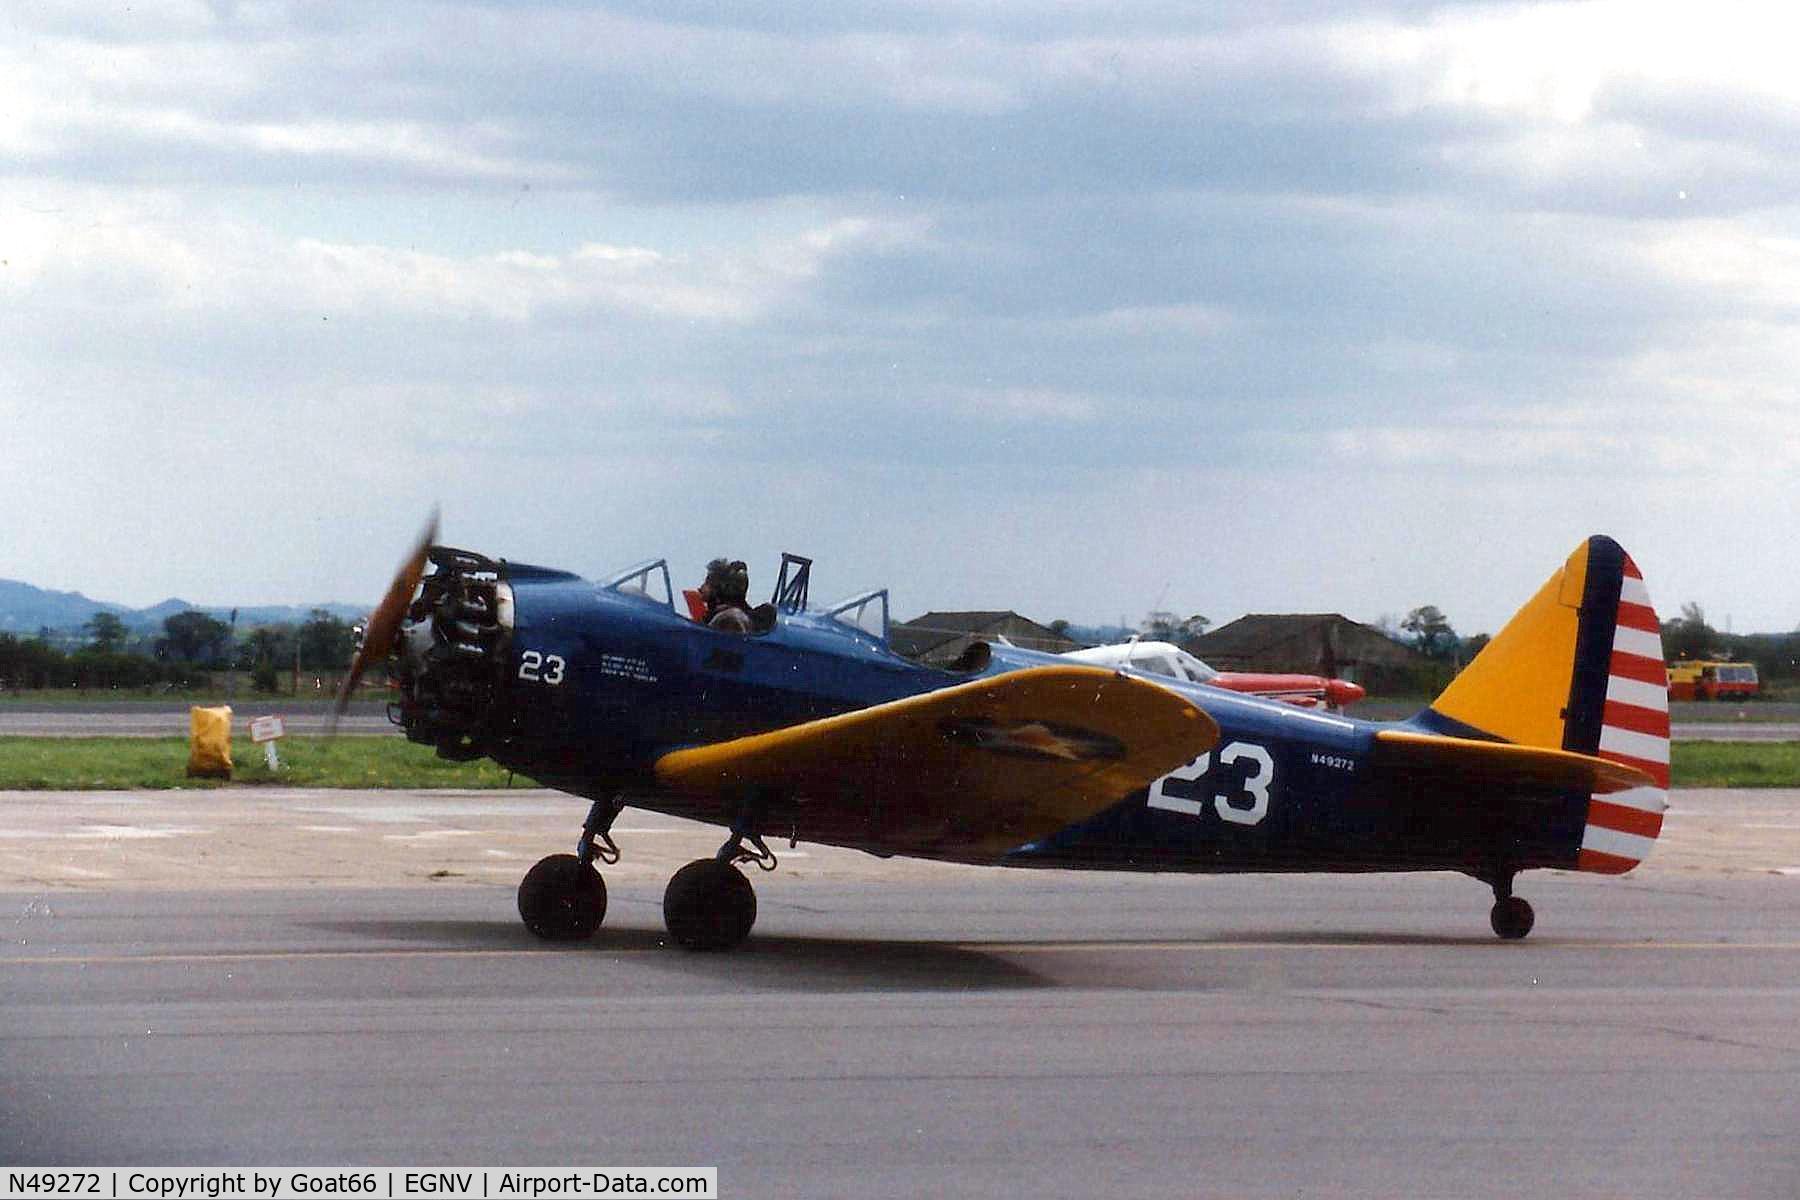 N49272, 1943 Fairchild M-62 C/N HO-437, Making its first appearance at MME, May 1989